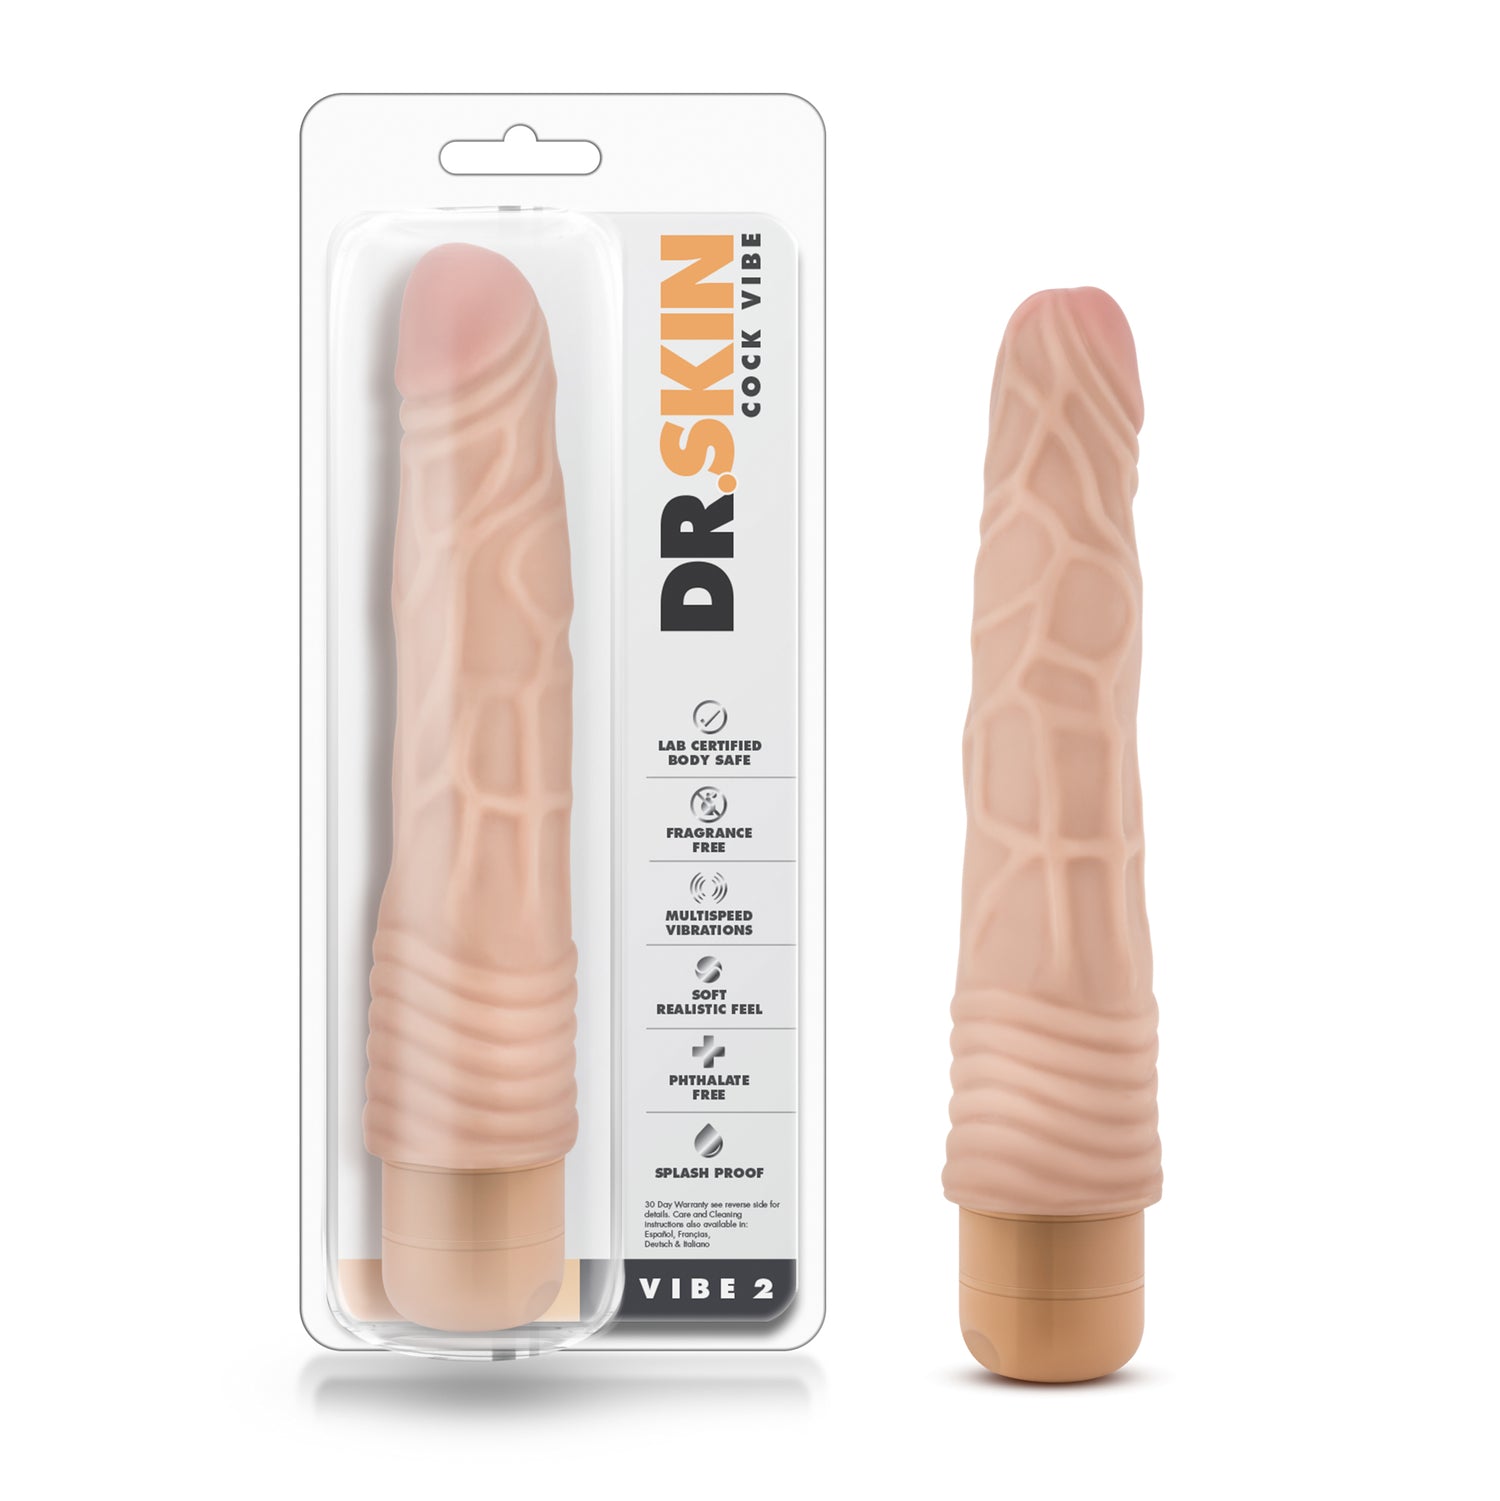 Dr Skin Cock Vibe 2 9in Vibrating Cock Beige - Just for you desires